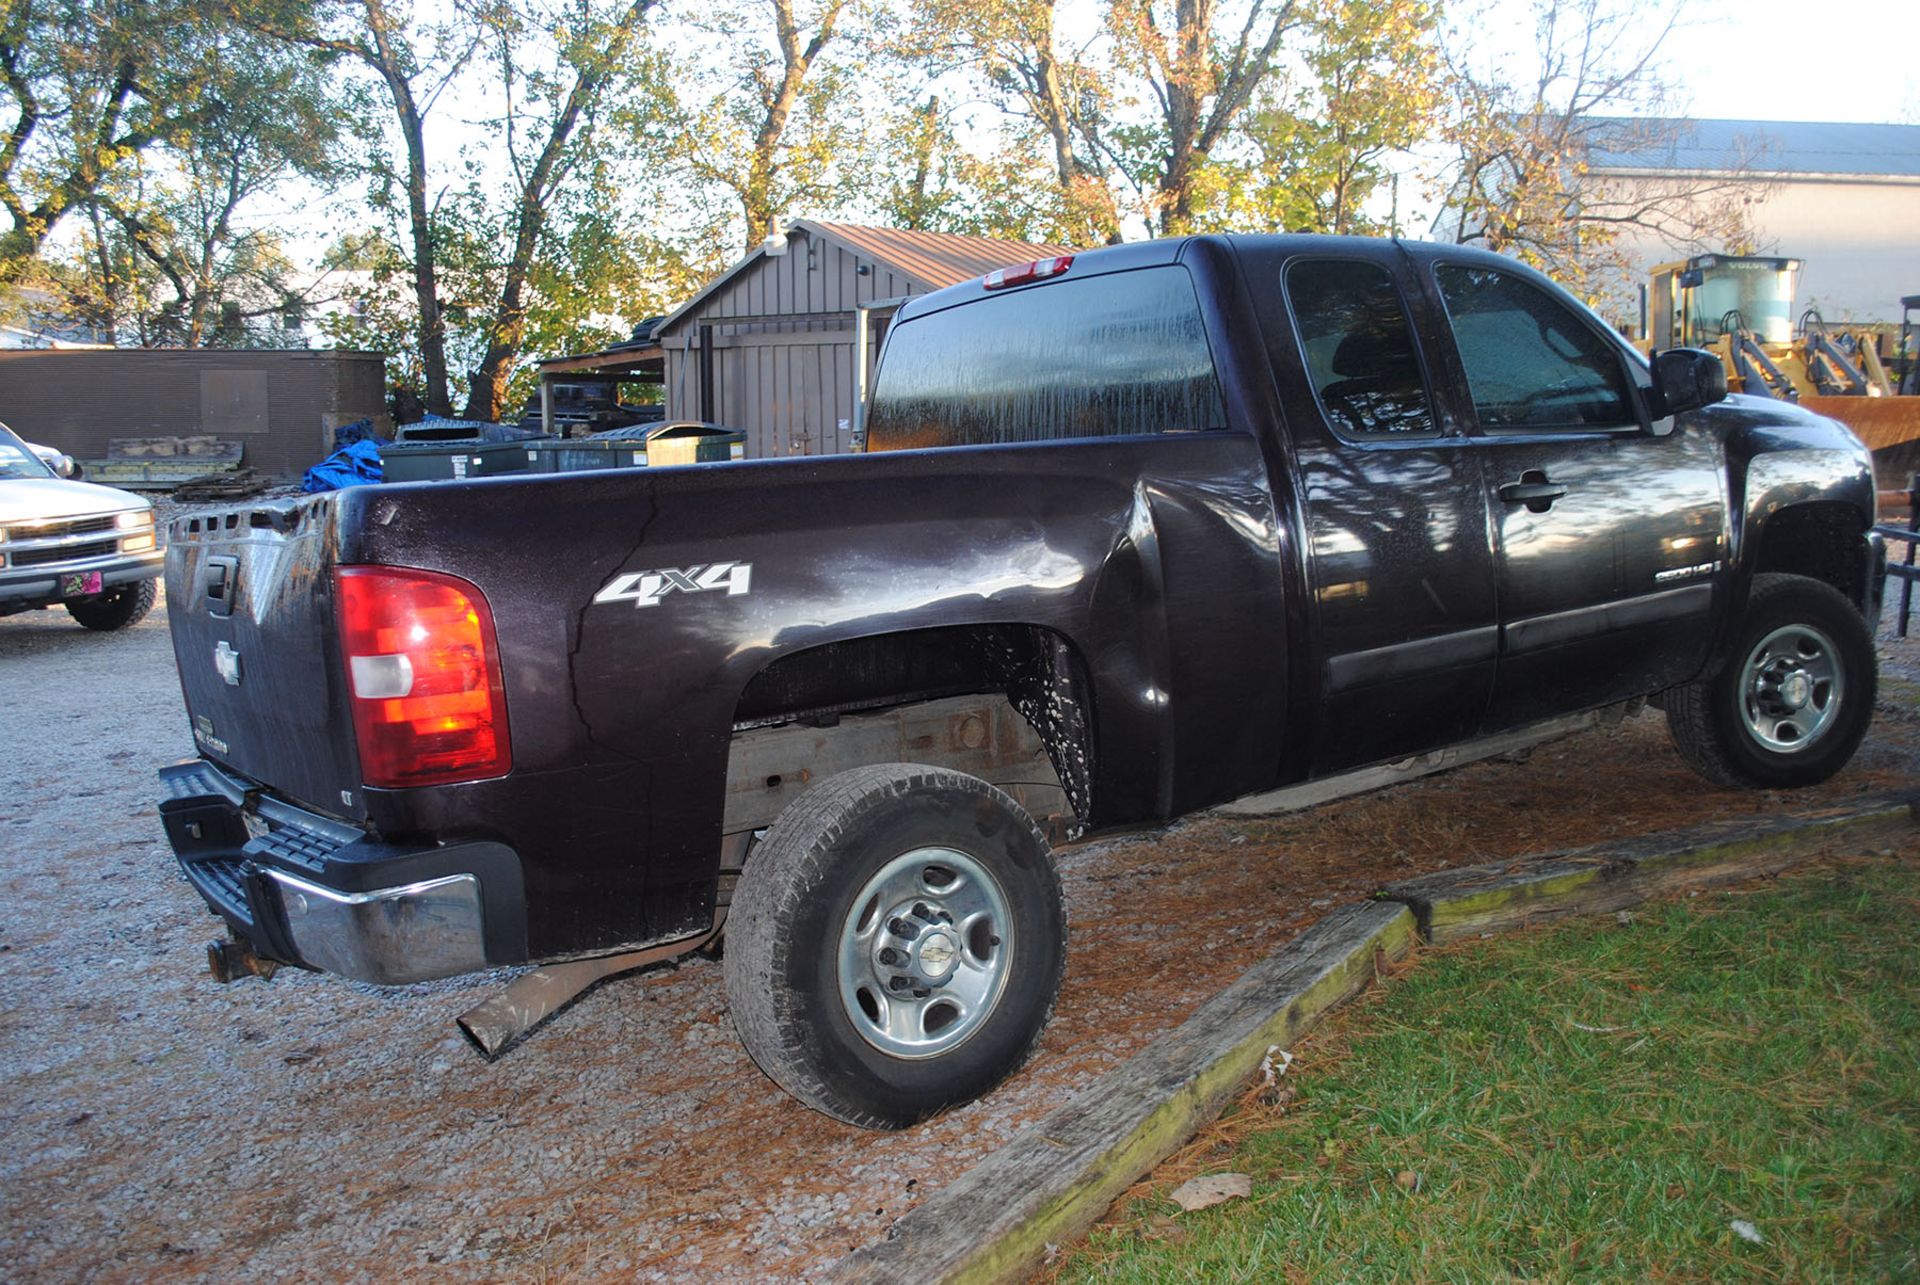 2008 CHEVY SILVERADO TRUCK WITH EXTENDED CAB, 6-LITER, V8, 4WD, POWER WINDOWS & LOCKS, 329,167 - Image 3 of 4